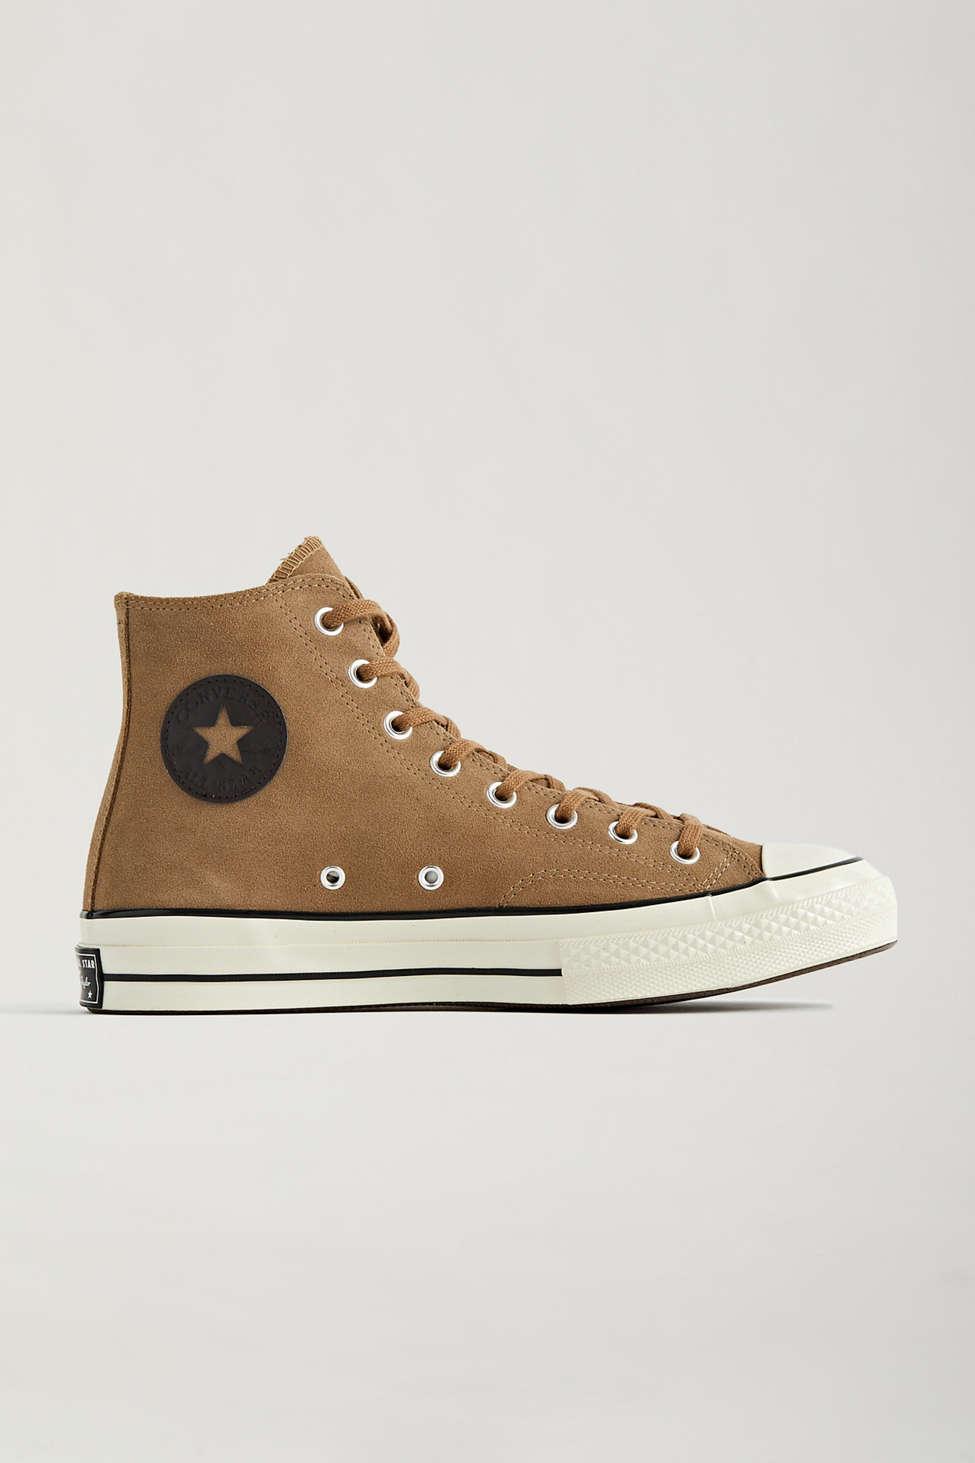 Converse Chuck Taylor 70 Suede High Top Sneaker in for Lyst